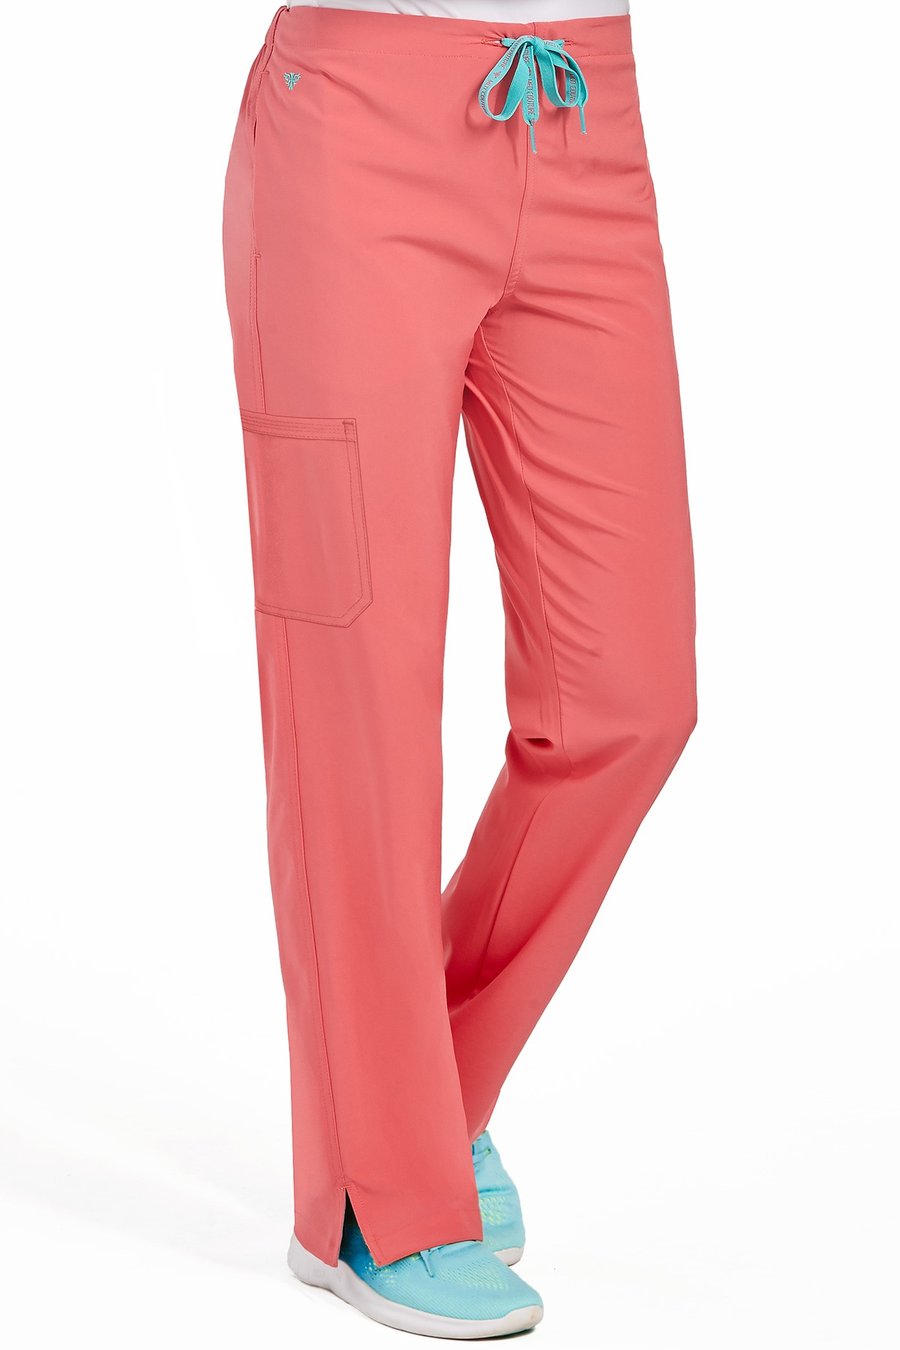 1 Cargo Pocket Pant by Med Couture XS-3XL / CORAL